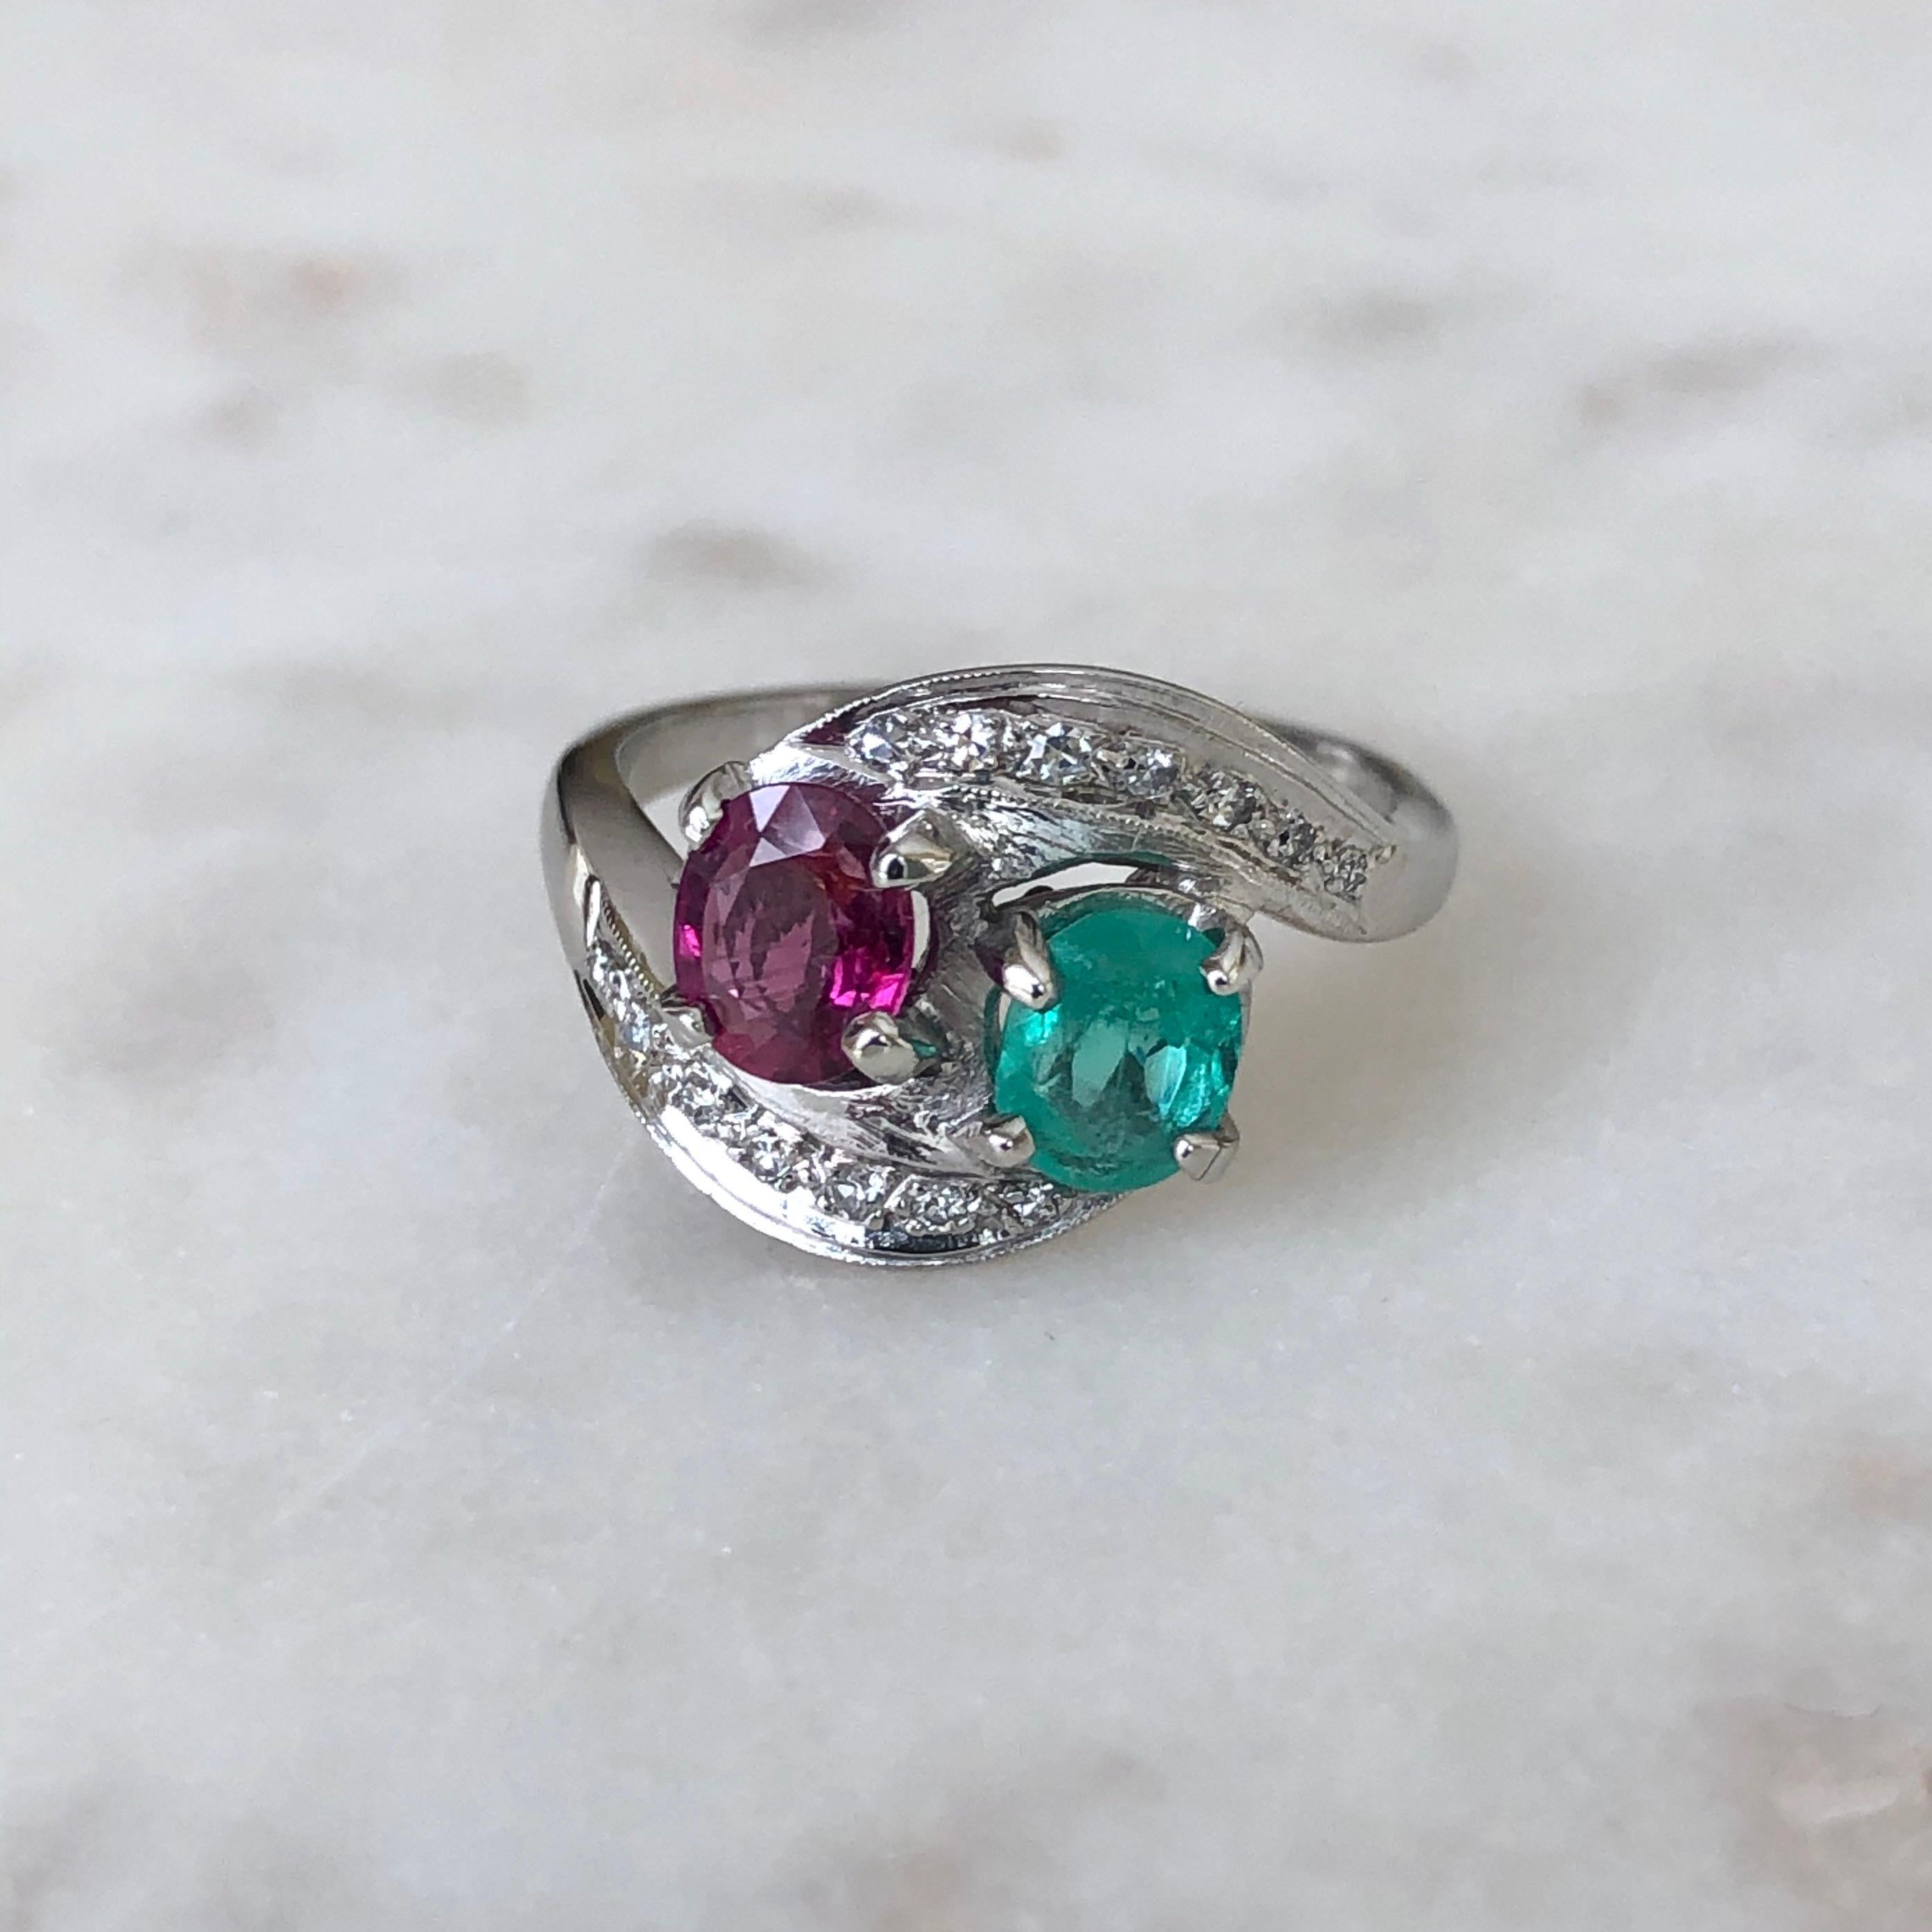 An Exclusive Antique Art Deco Toi et Moi Emerald Ruby Diamond Platinum Engagement Ring 
Primary Stone: 100% Natural Ruby, Emerald and Diamond 
Shape or Cut: Oval Cut
Total Gemstone Weight: Approx. 1.73 Carat 
Average Color Gemstone: Best Color